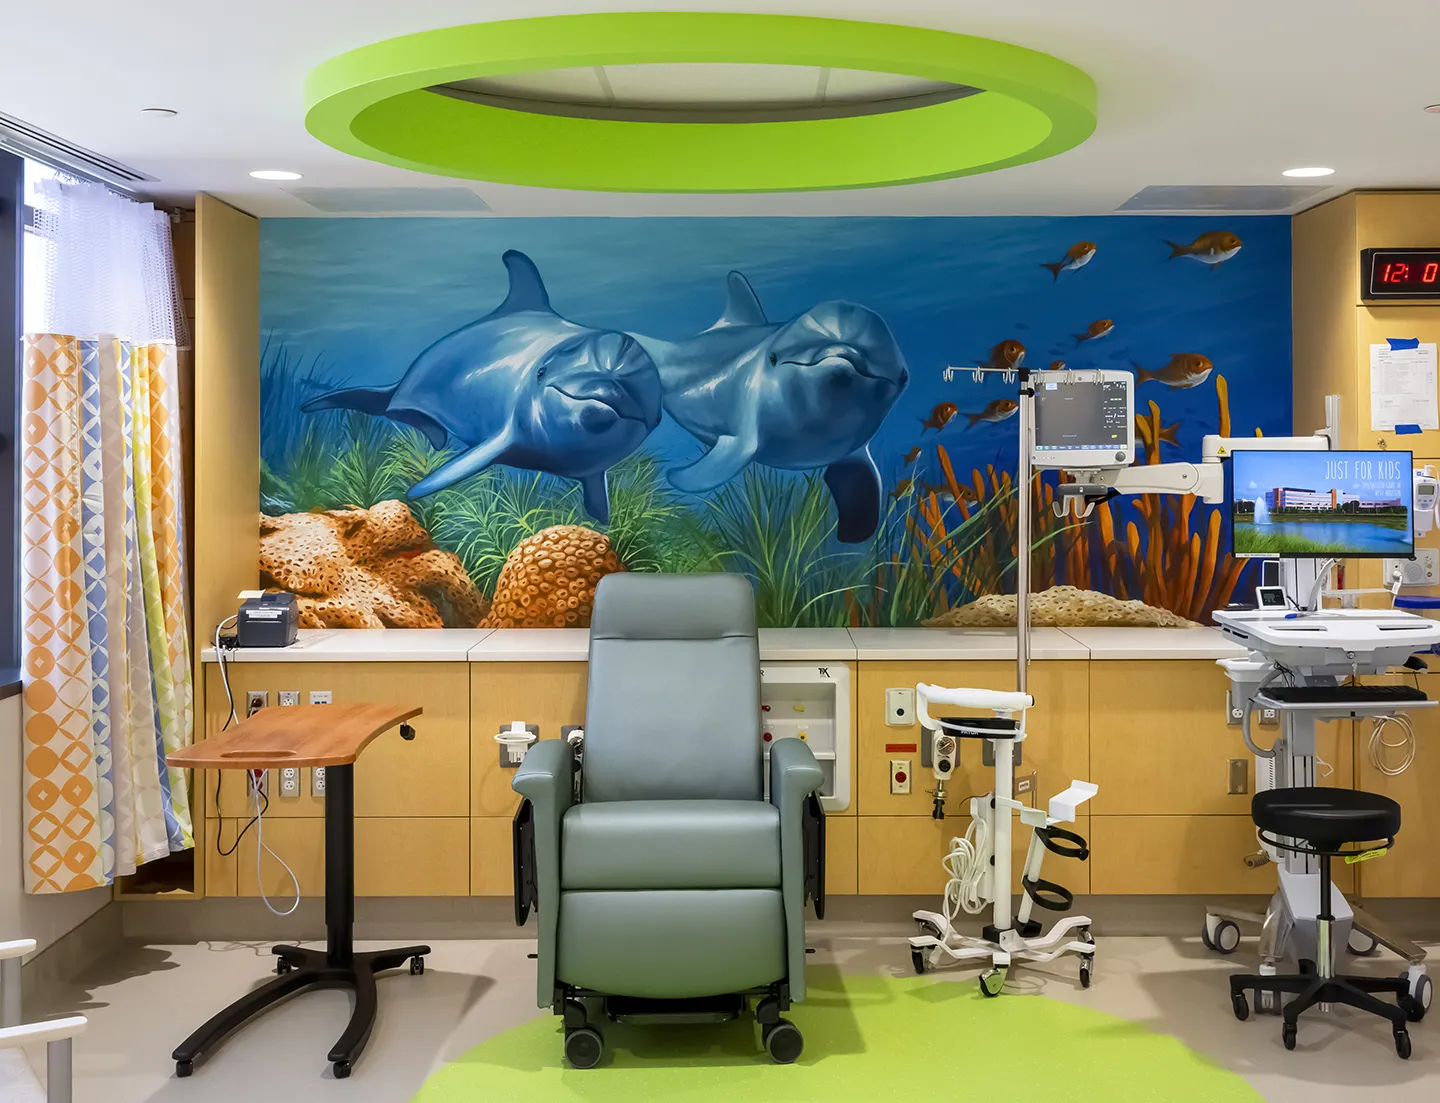 Underwater-themed murals create a welcoming and child-friendly space for patients.